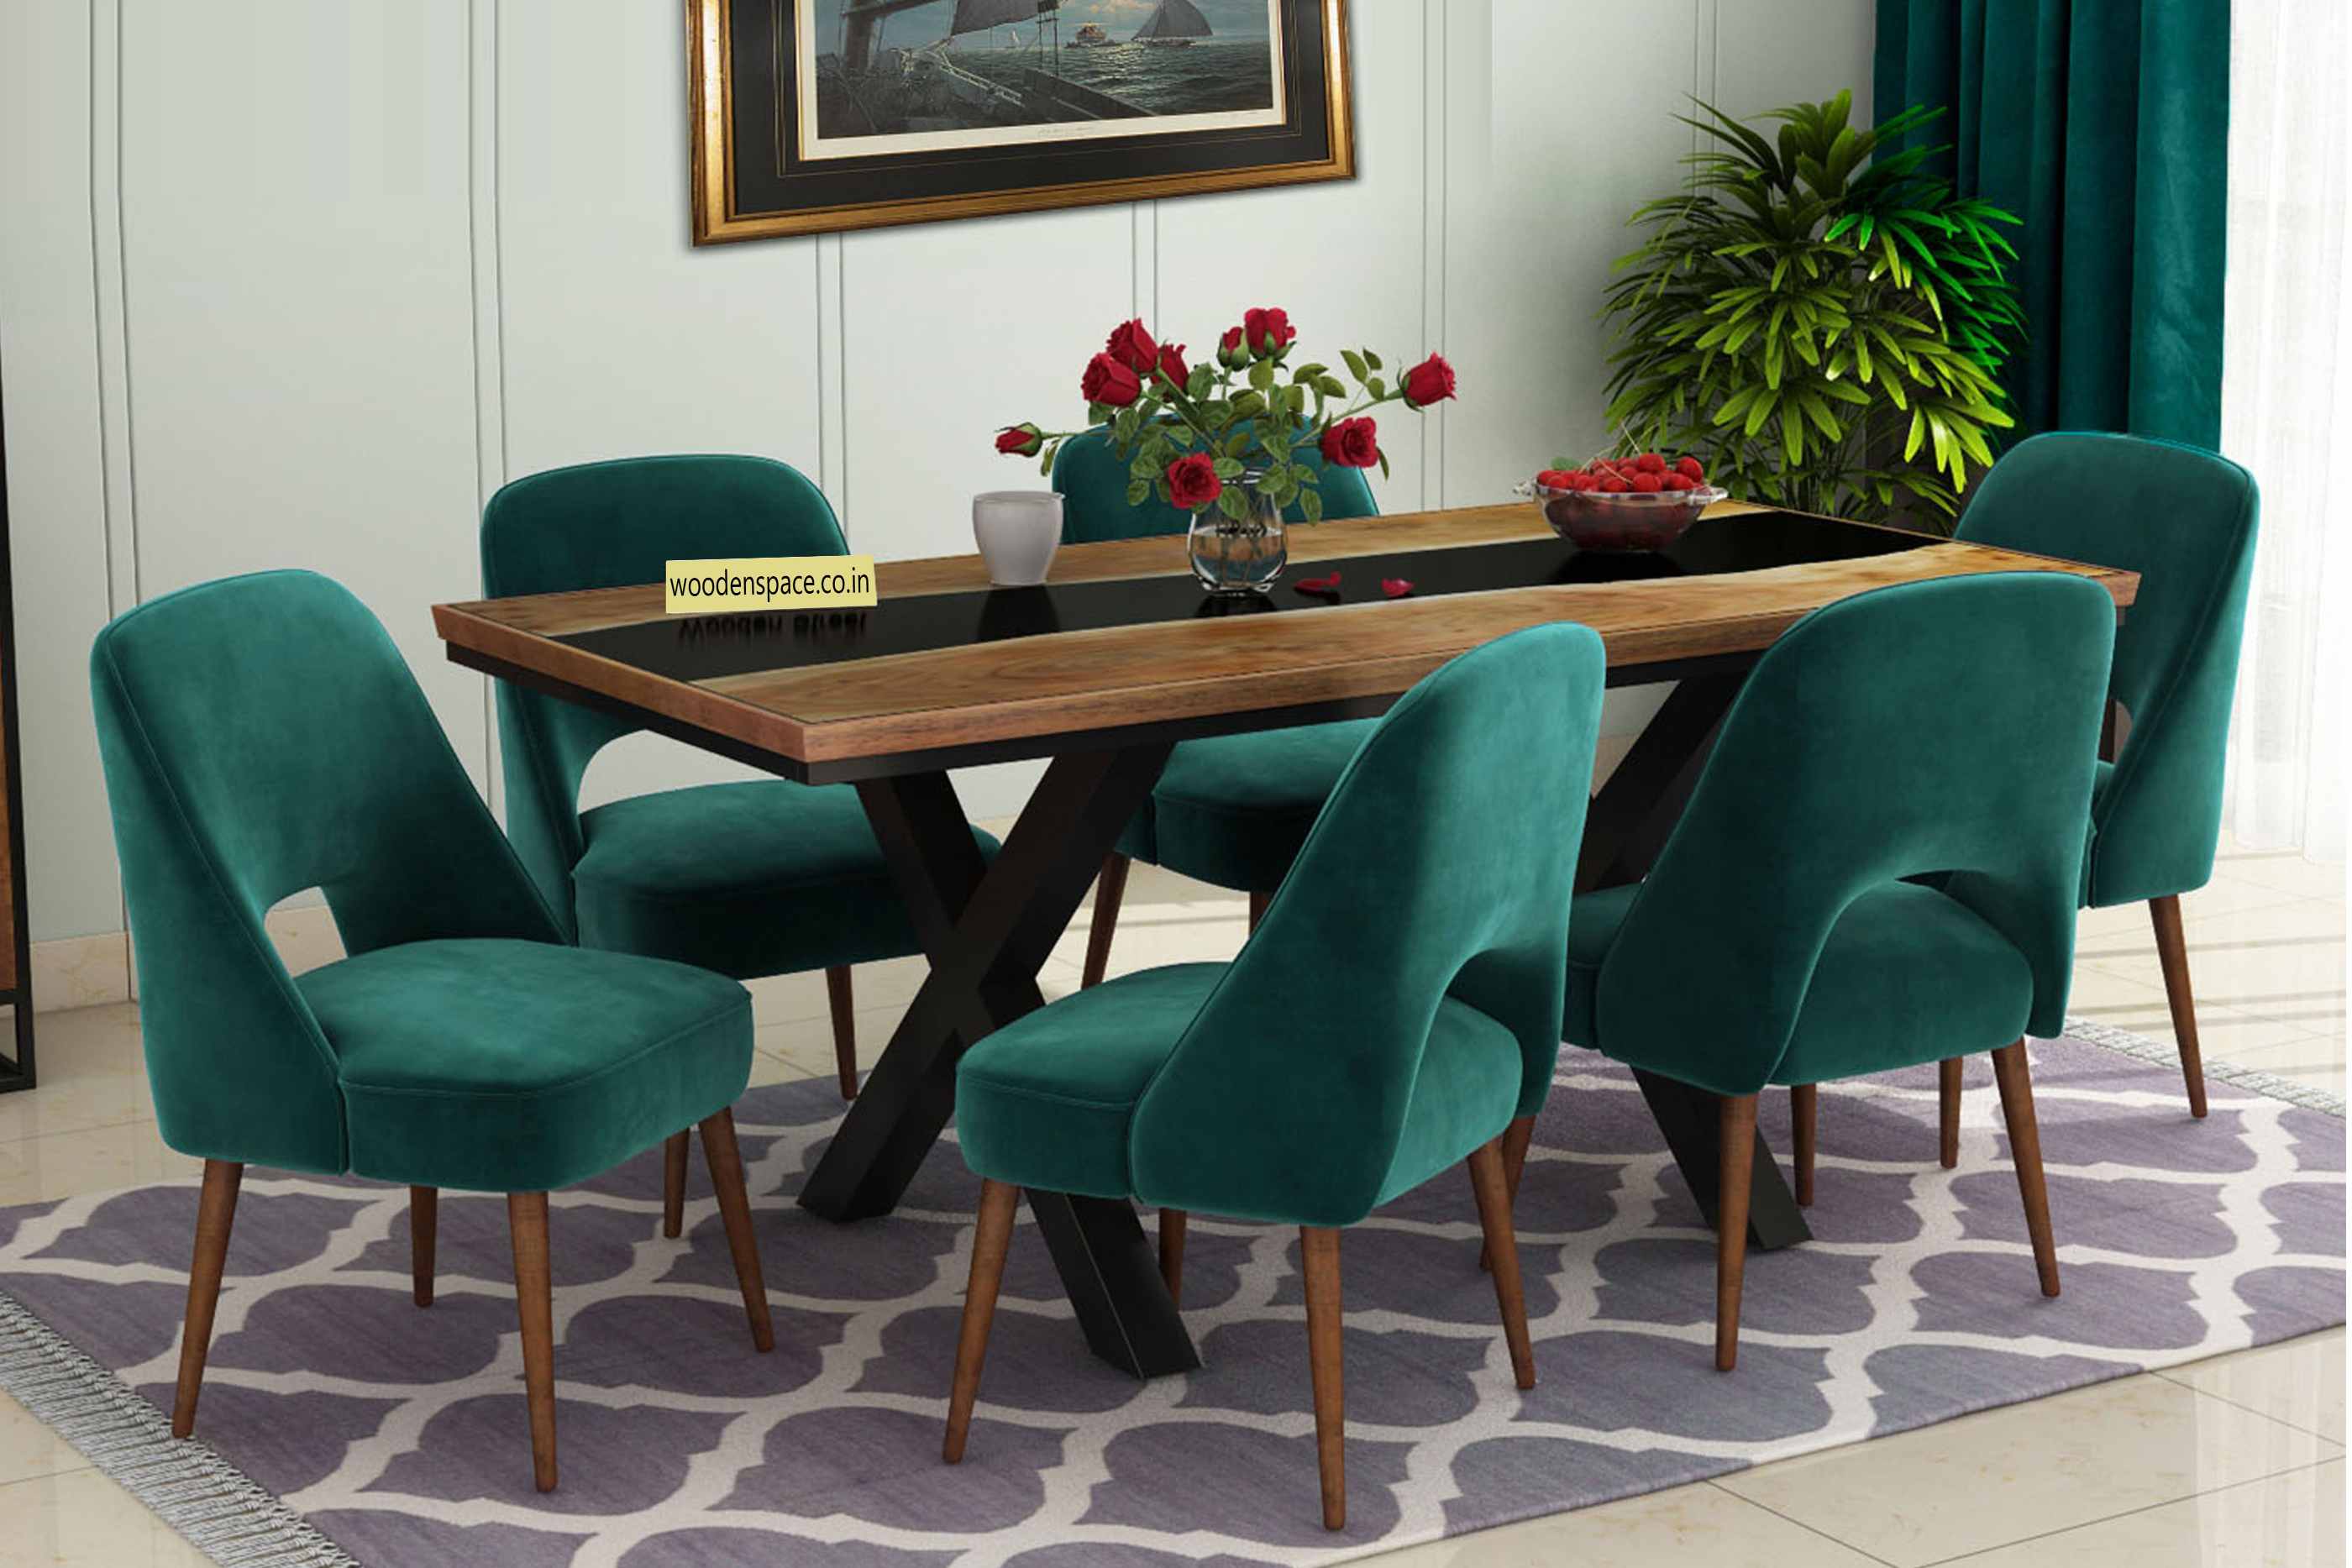 Diamond dining table set with 6 chairs